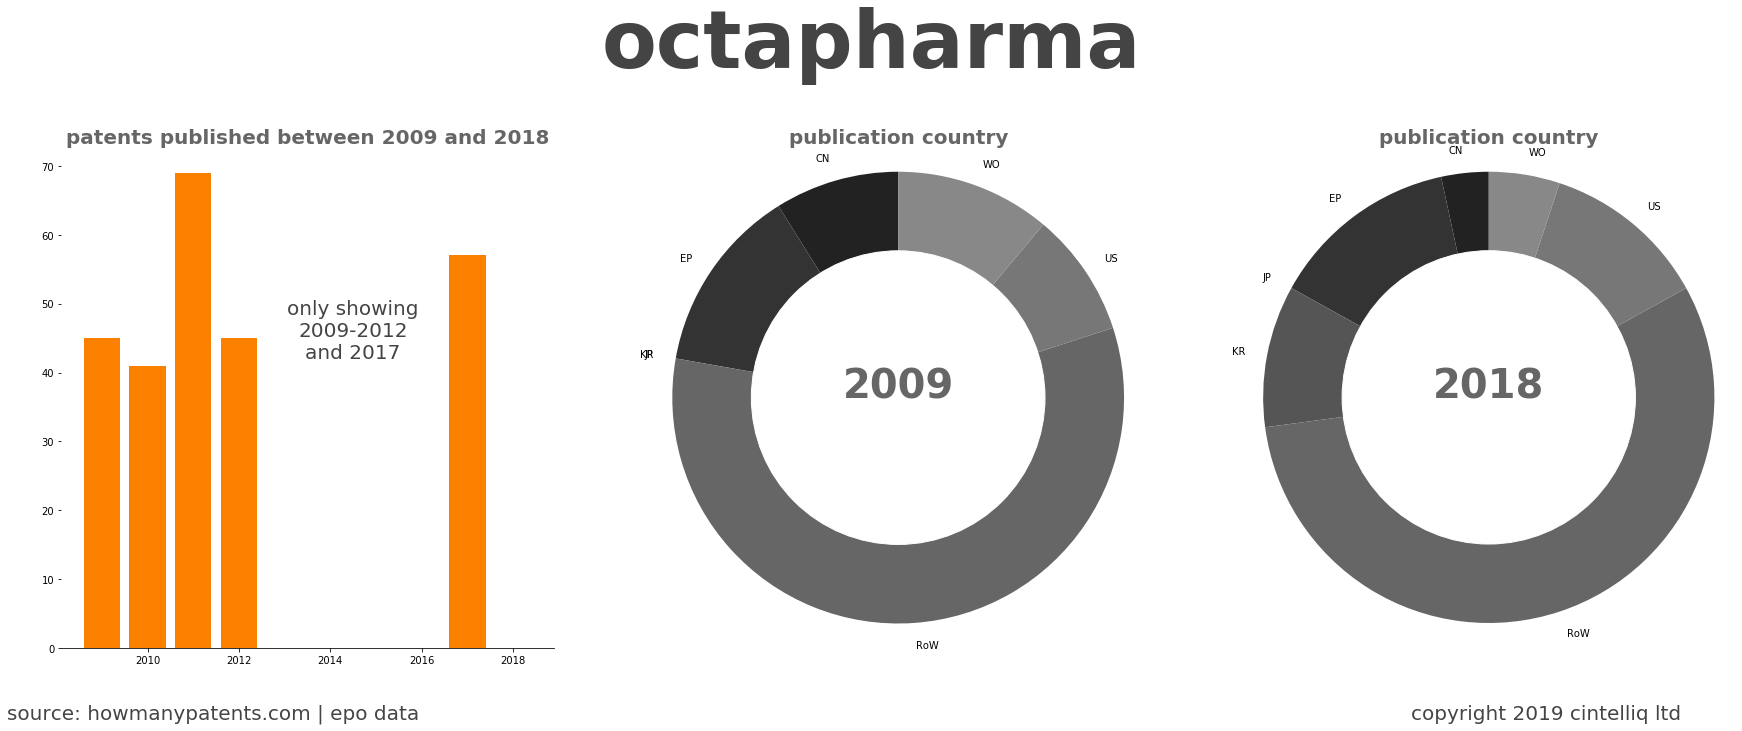 summary of patents for Octapharma